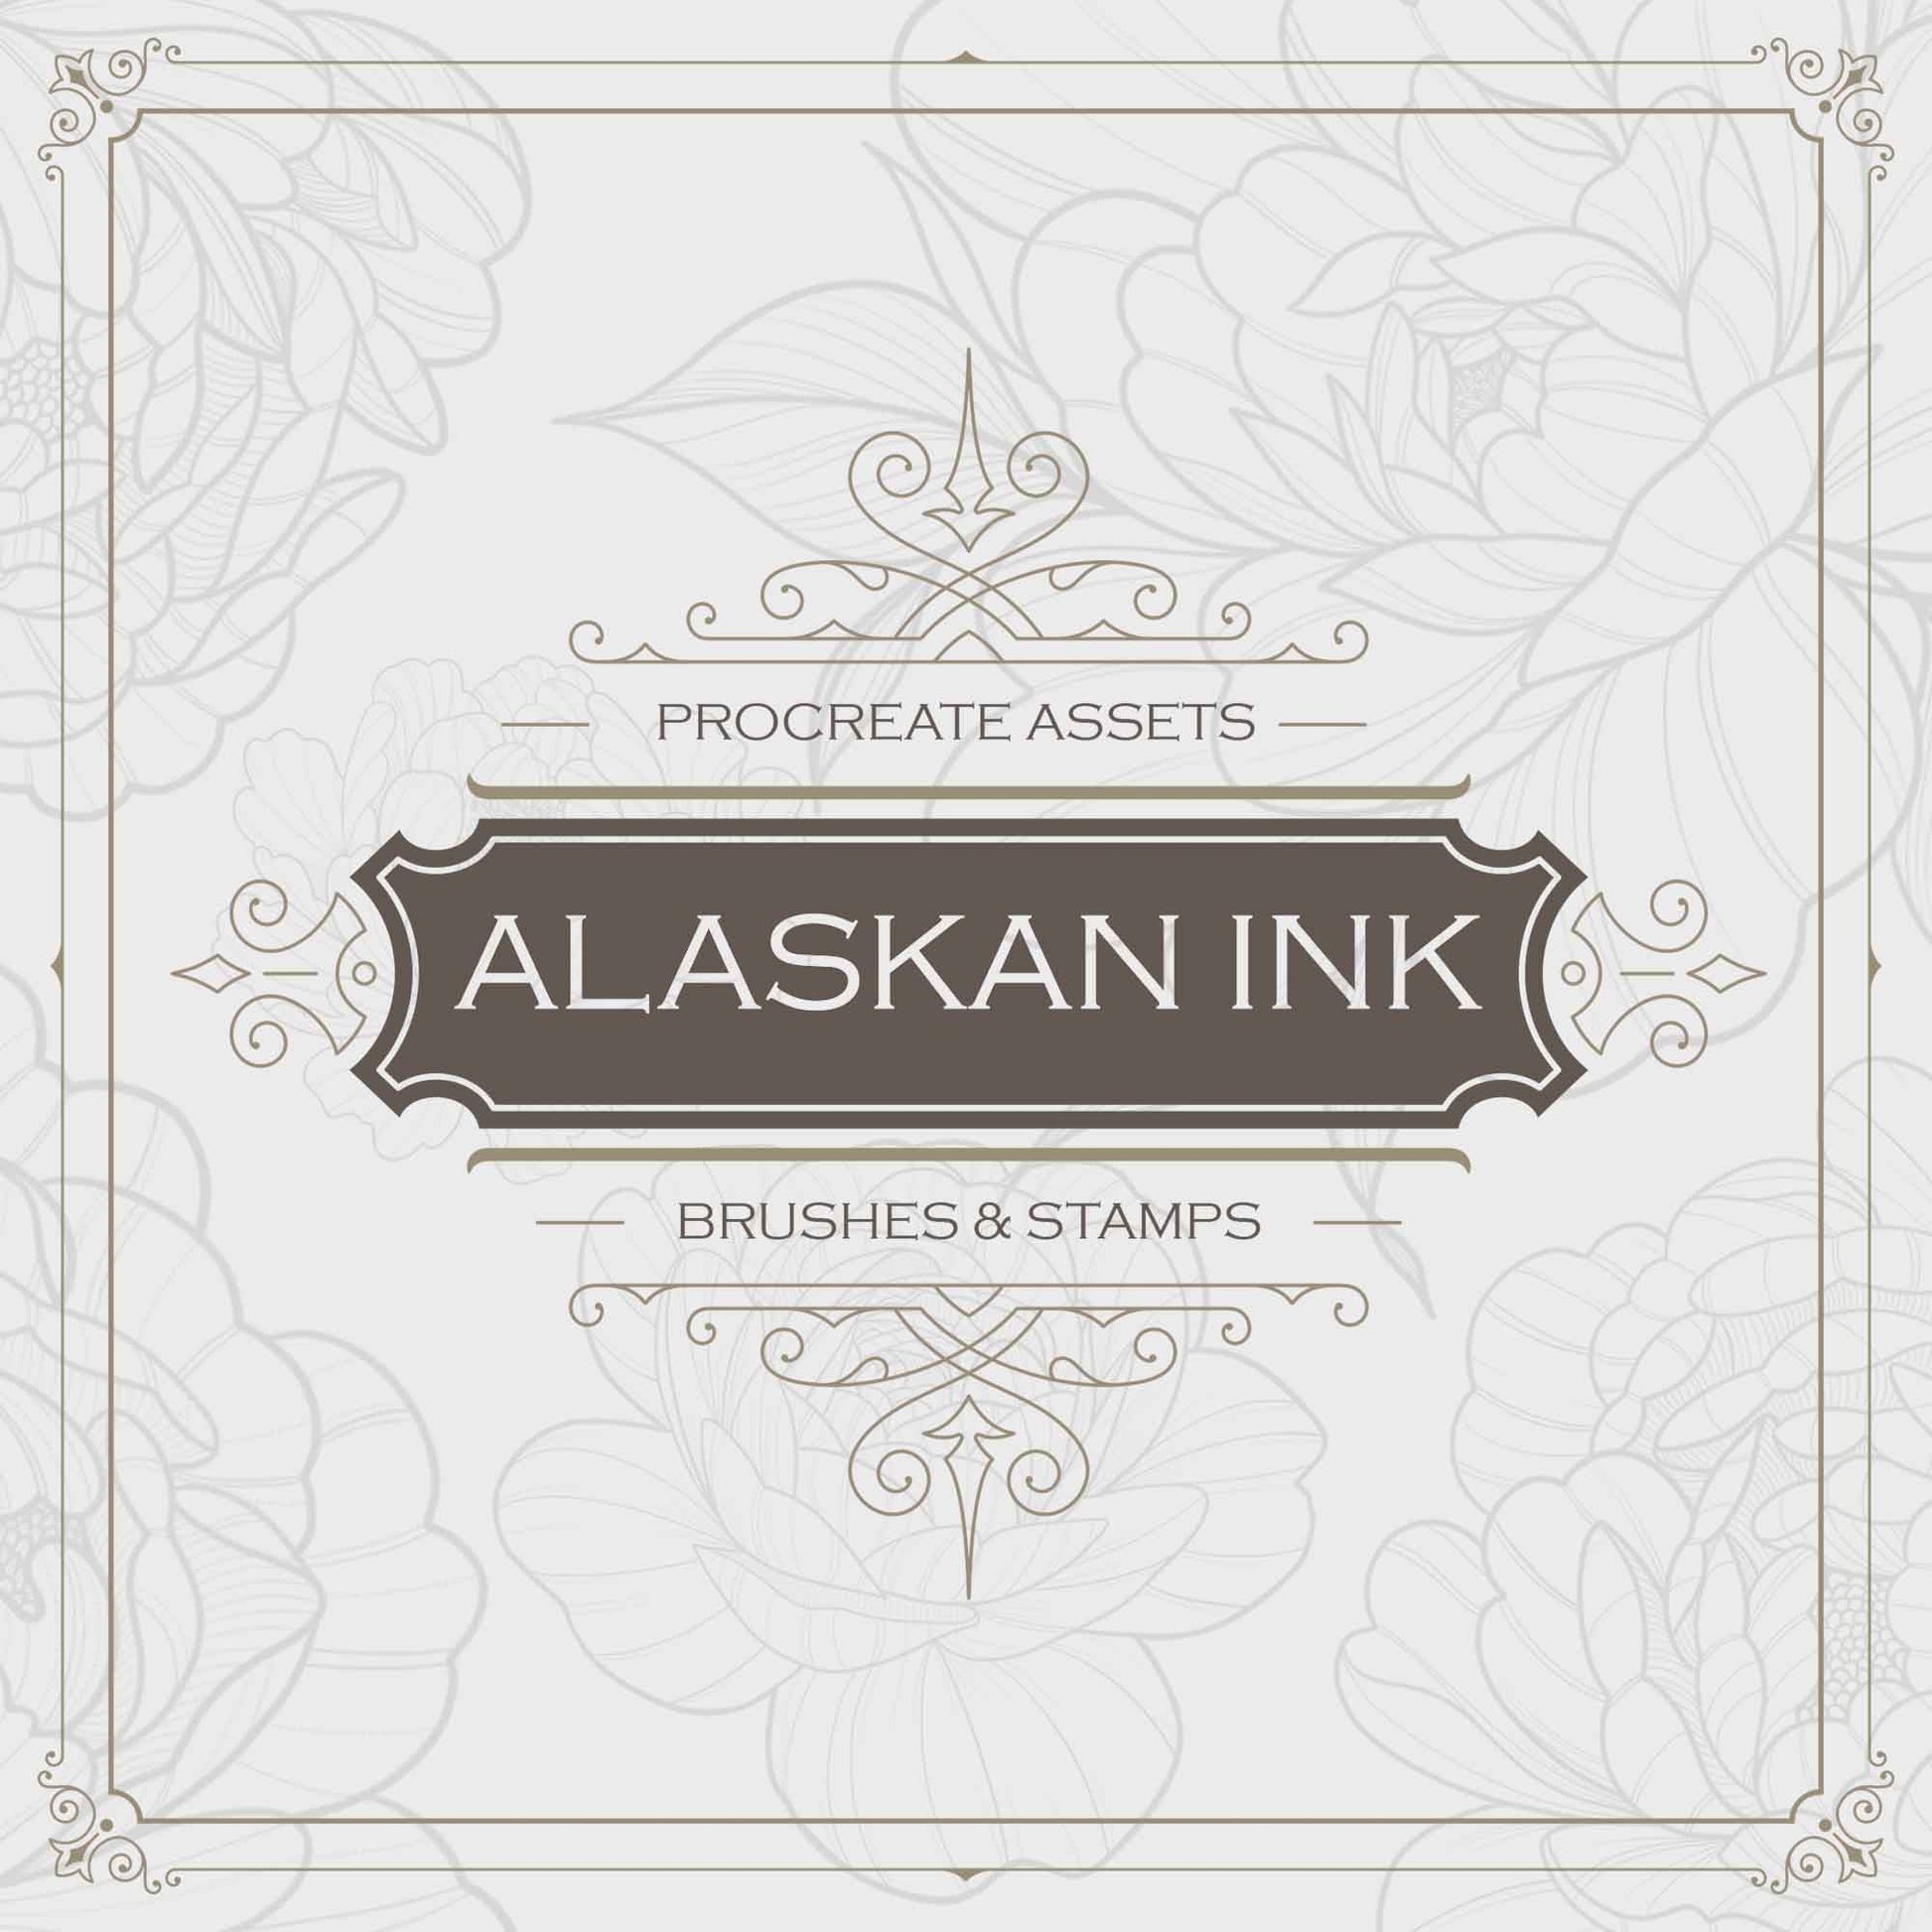 90 Cosmic Tattoo Ornament Brushes and Stamps for Procreate application created by Alaskan ink